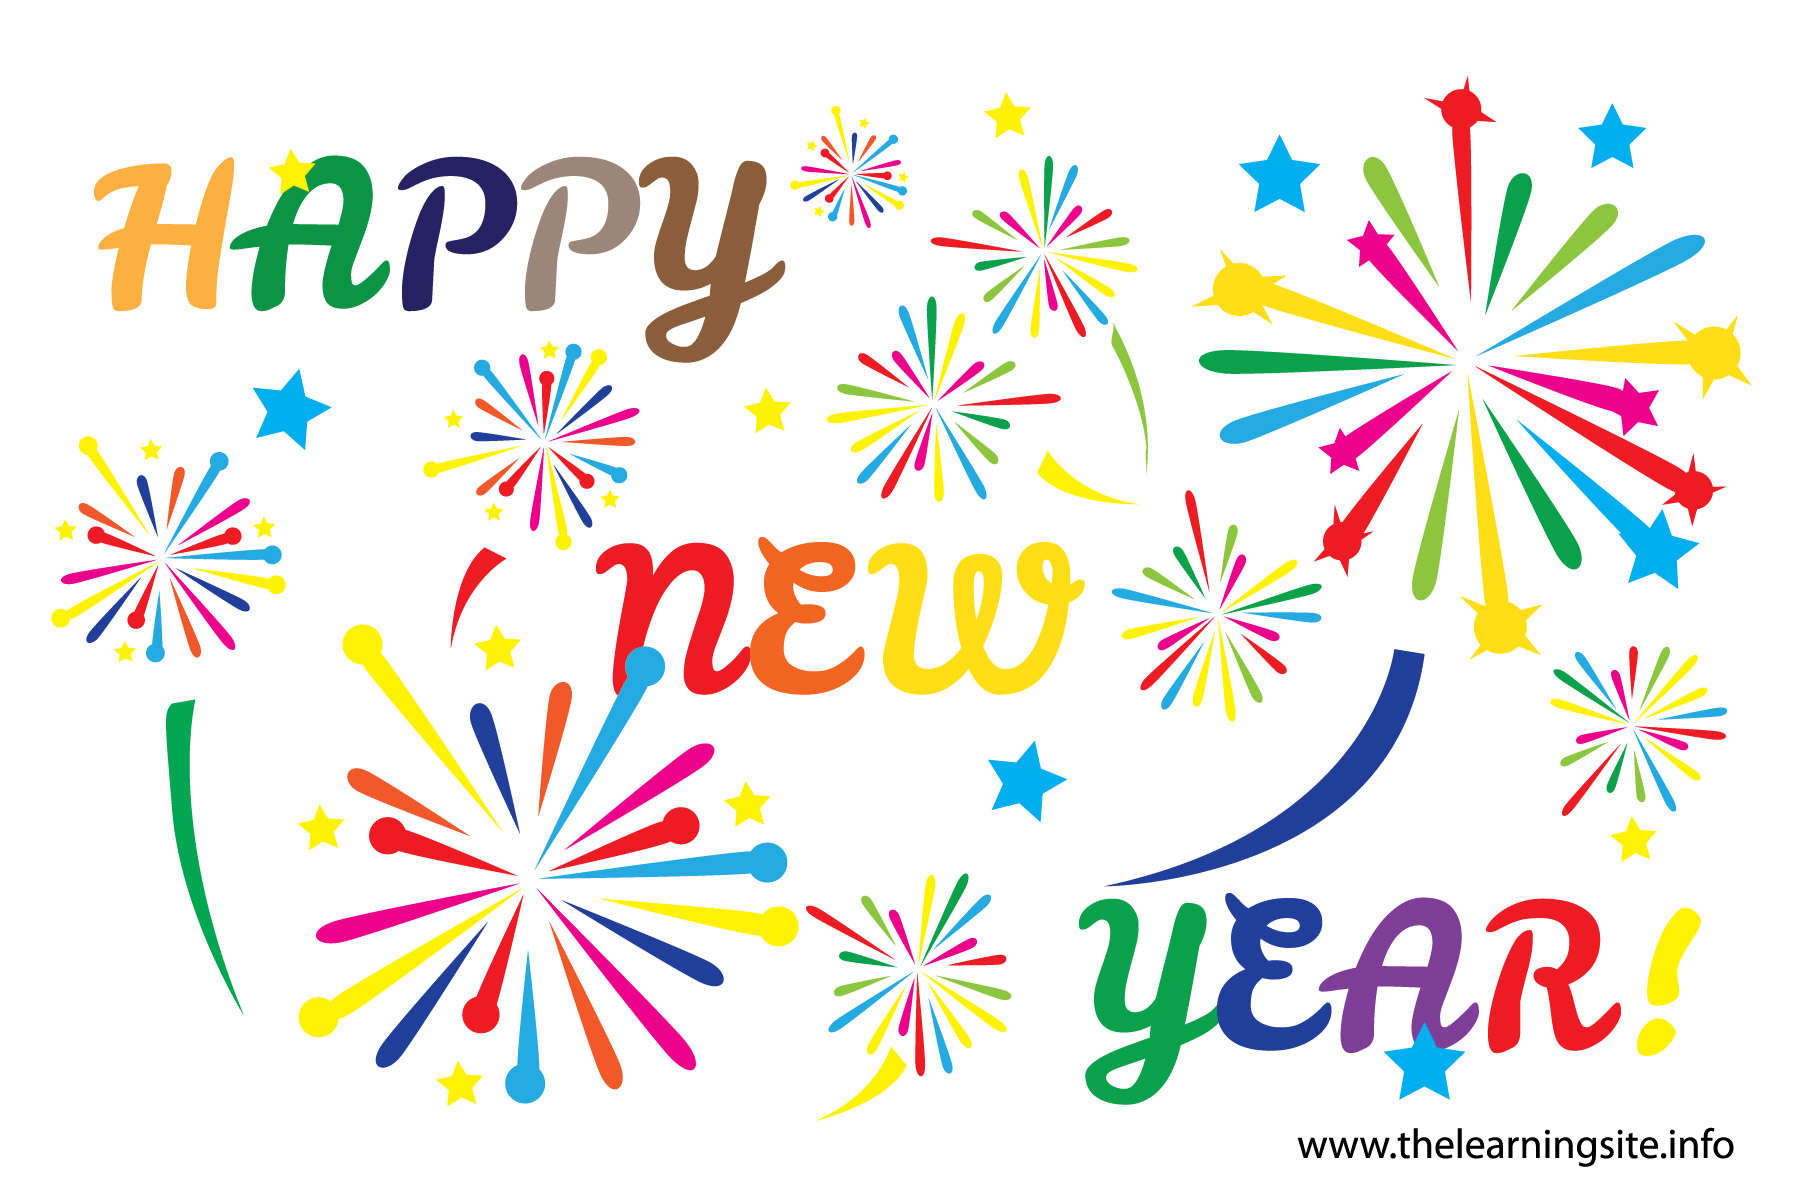 Happy new year clipart - Clipartix